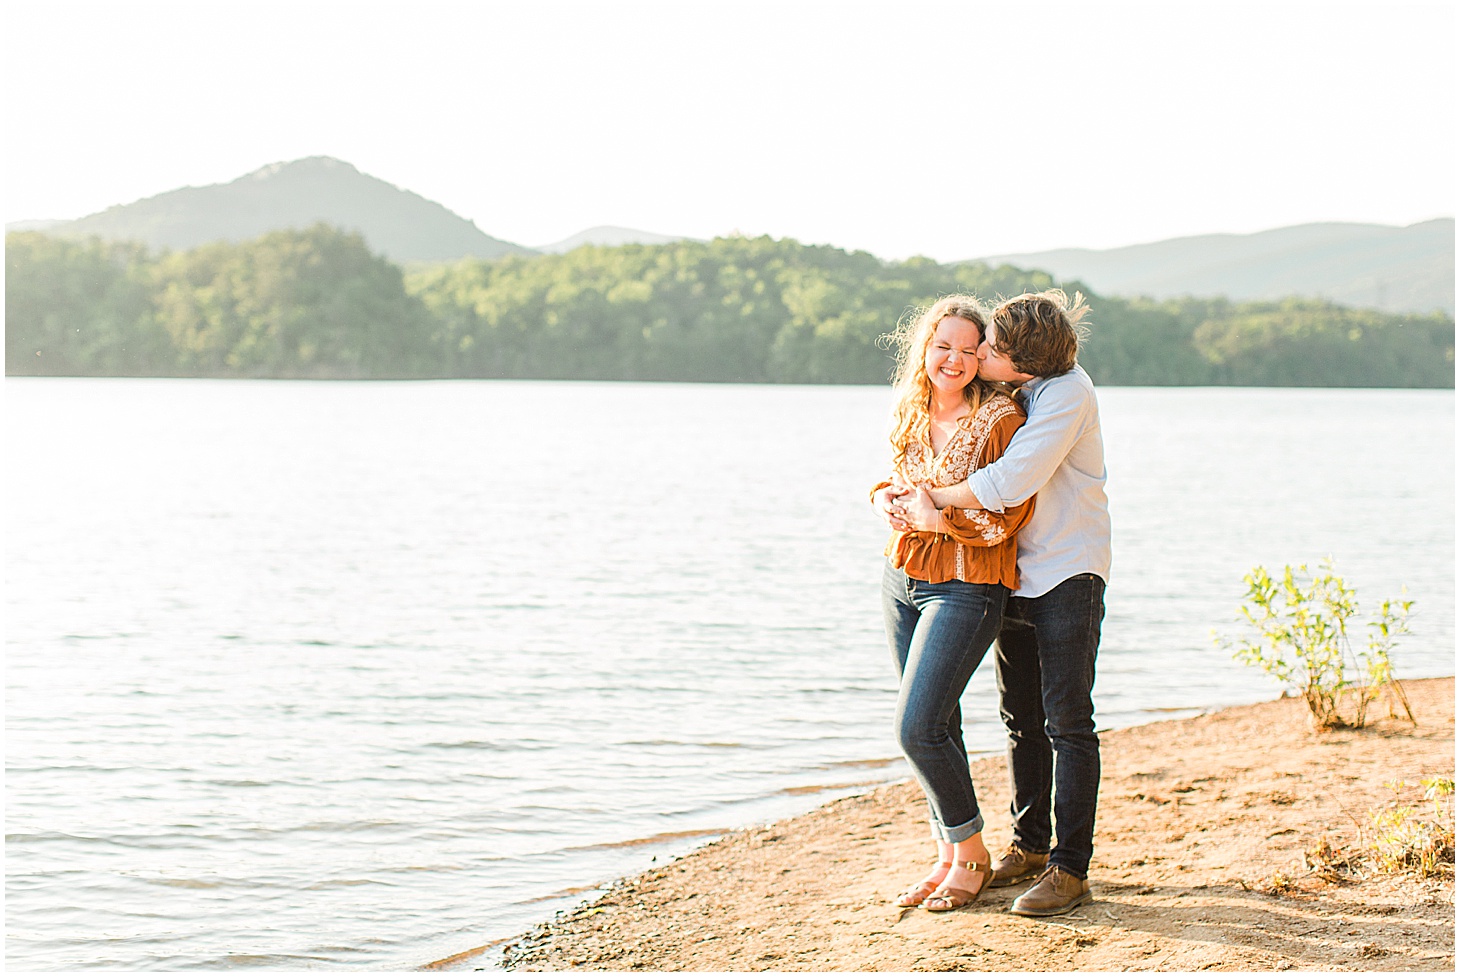 carvinscoveengagementsession_roanokeengagementsession_carvinscove_virginiawedding_virginiaweddingphotographer_vaweddingphotographer_photo_0001.jpg